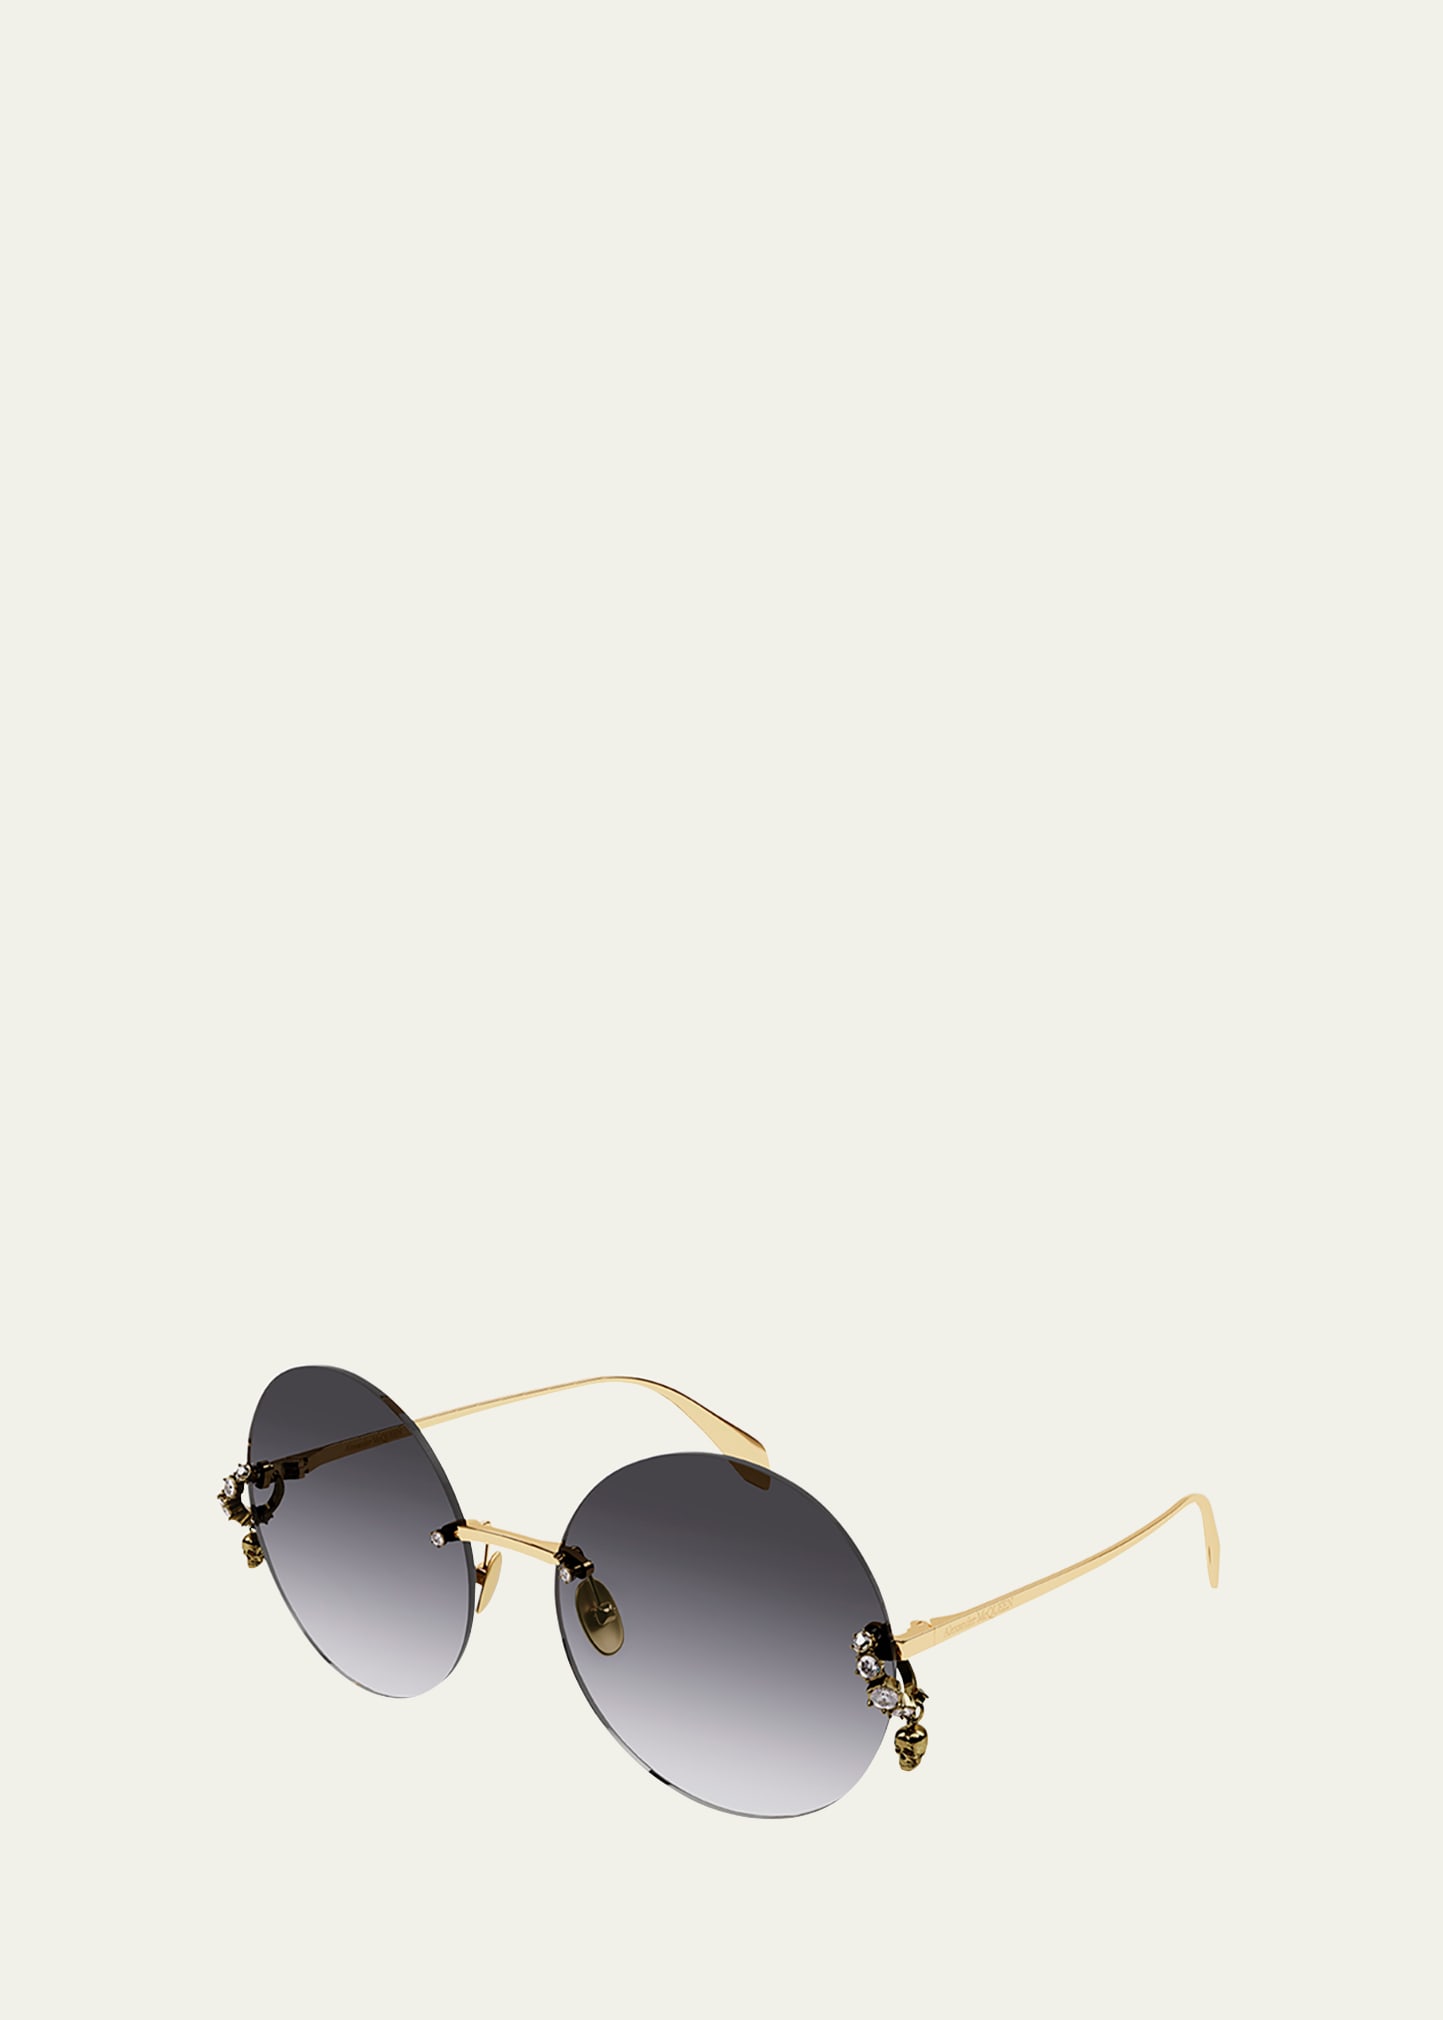 Shop Alexander Mcqueen Metal Round Sunglasses W/ Skull Crystal Details In 001 Shiny Gold